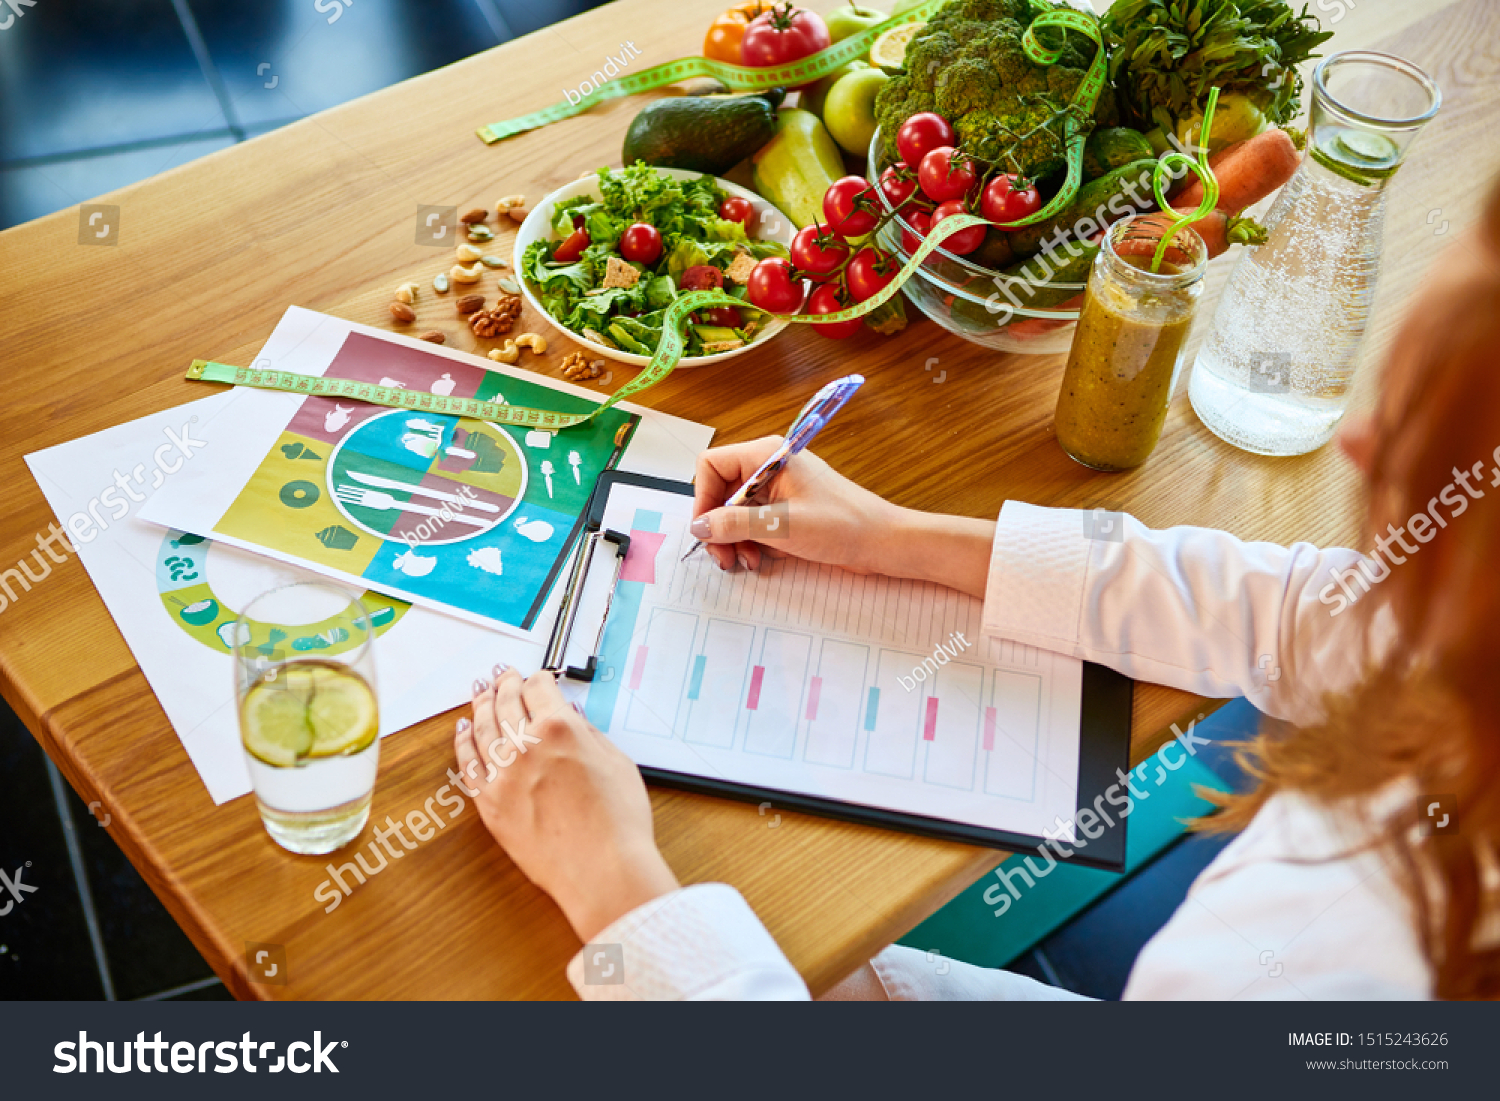 Woman dietitian in medical uniform with tape measure working on a diet plan sitting with different healthy food ingredients in the green office on background. Weight loss and right nutrition concept #1515243626